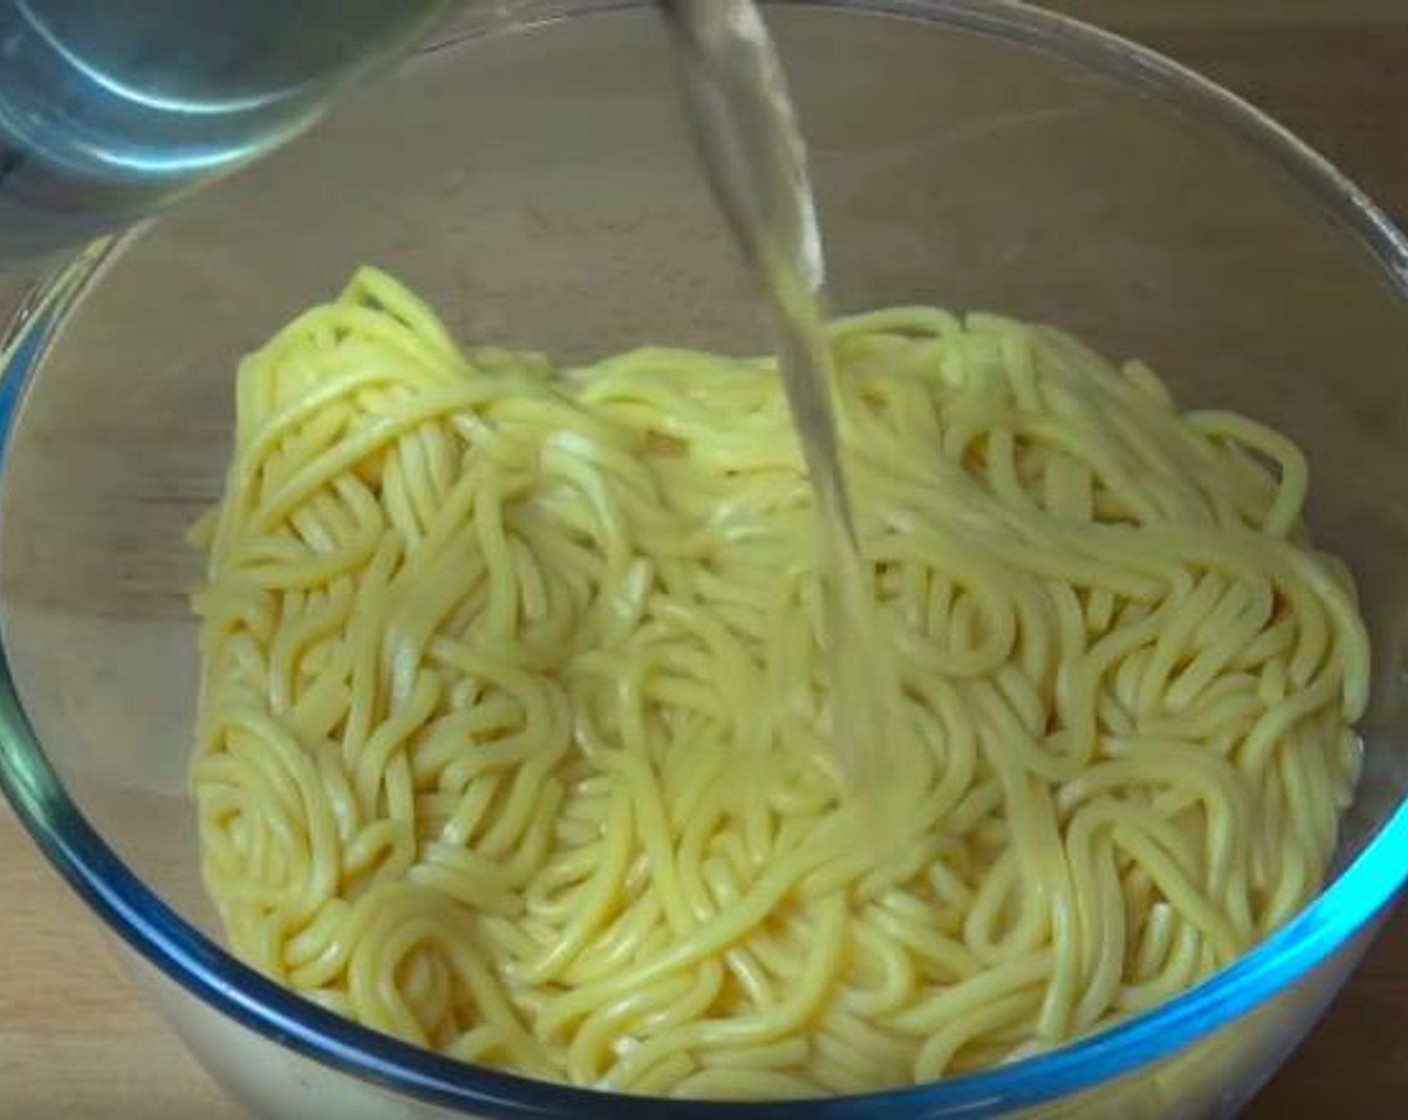 step 1 In a heat-proof glass bowl, cover Hokkien Noodles (16 oz) with boiling water. Gently stir until noodles start to separate, about 2-3 minutes. Drain and set aside.